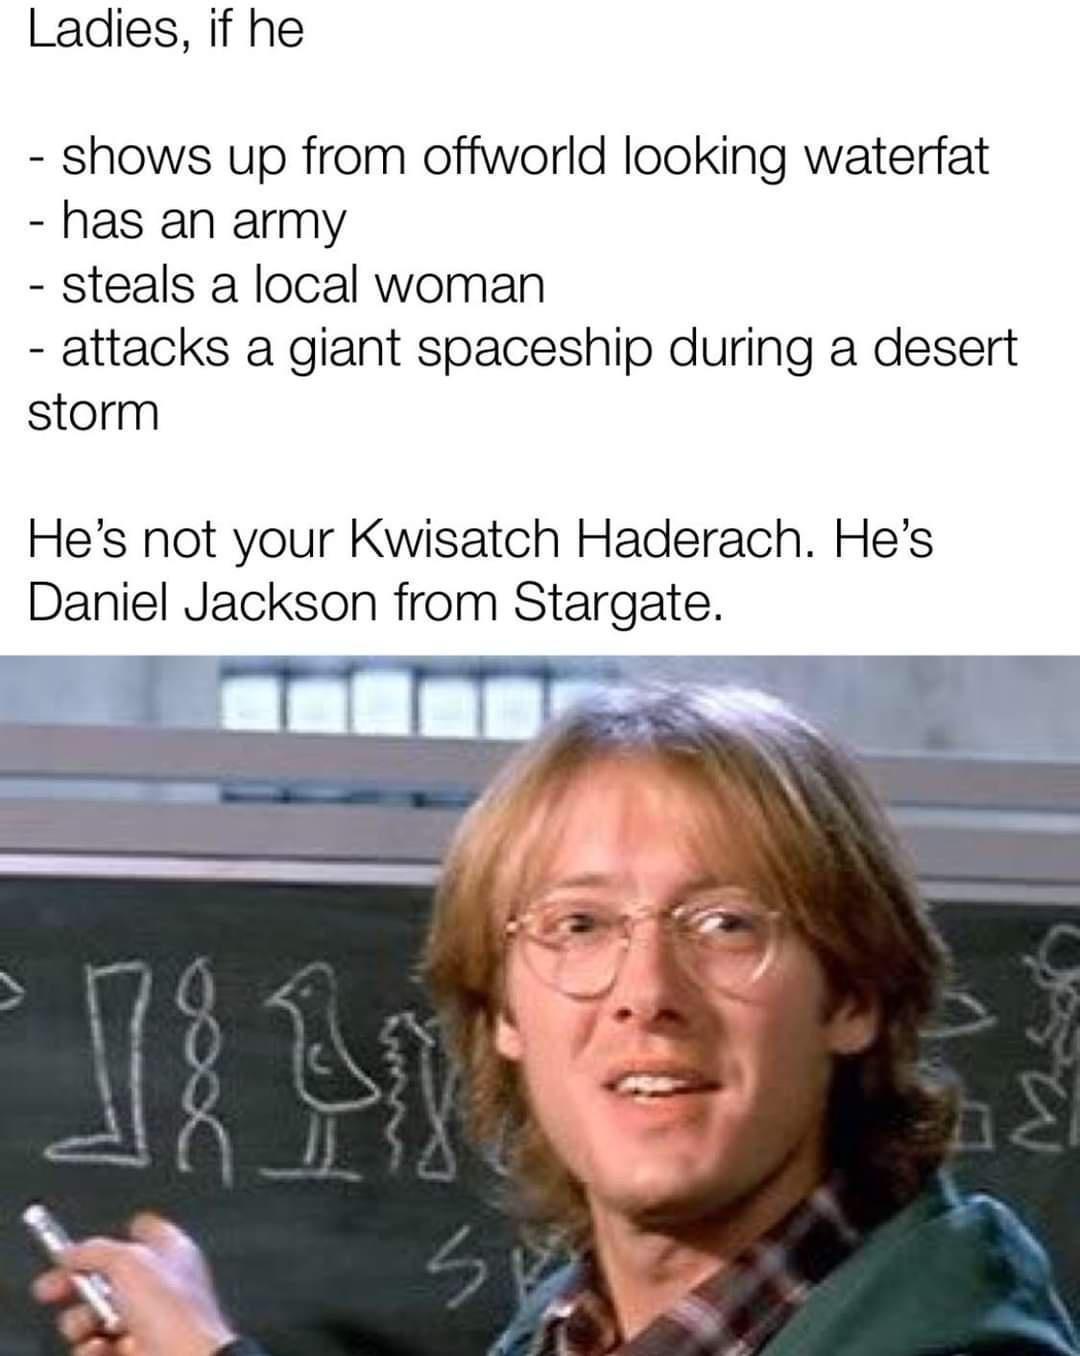 funny memes - stargate sg james spader - Ladies, if he shows up from offworld looking waterfat has an army steals a local woman attacks a giant spaceship during a desert storm He's not your Kwisatch Haderach. He's Daniel Jackson from Stargate. w 5